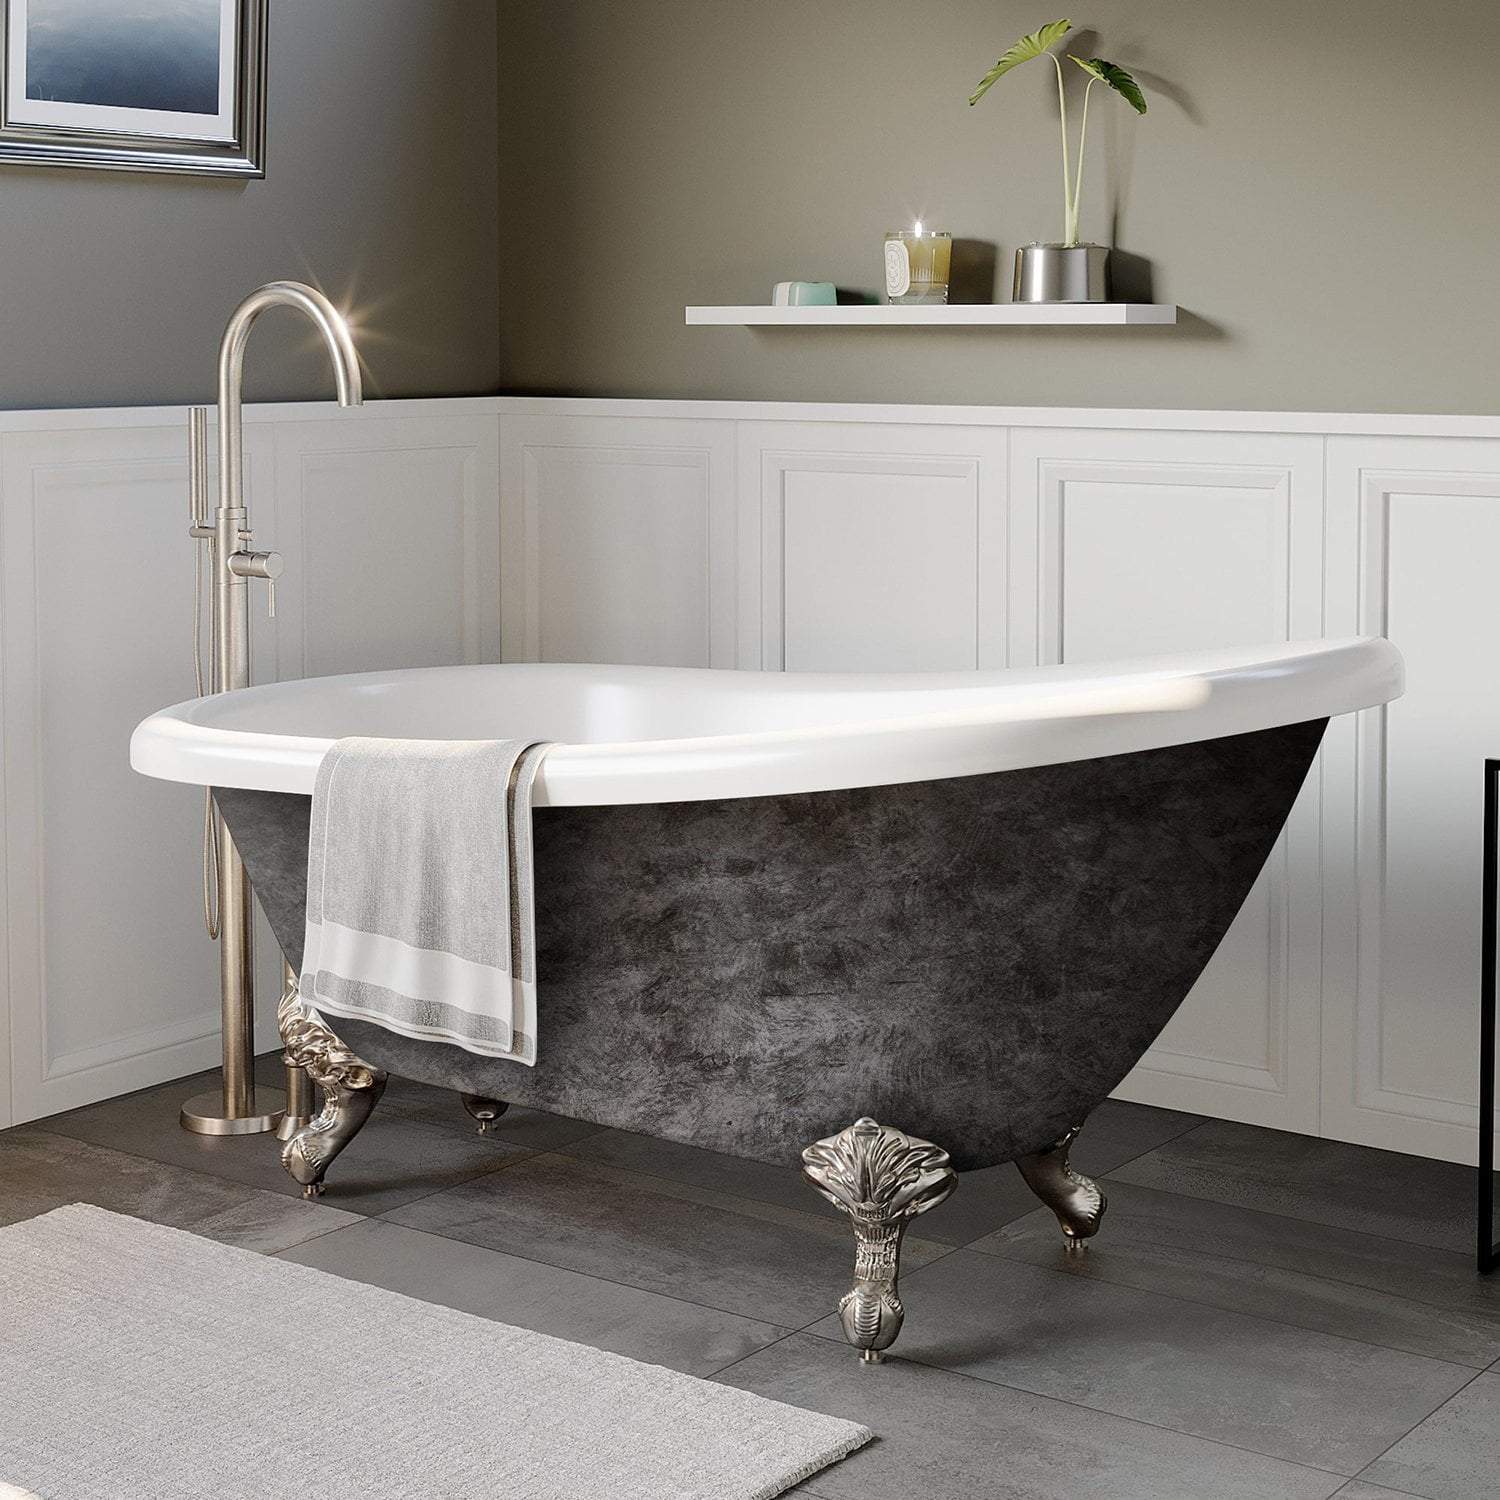 Scorched Platinum 61” x 28” Acrylic Slipper Bathtub with” No Faucet Holes and Brushed Nickel Ball and Claw Feet